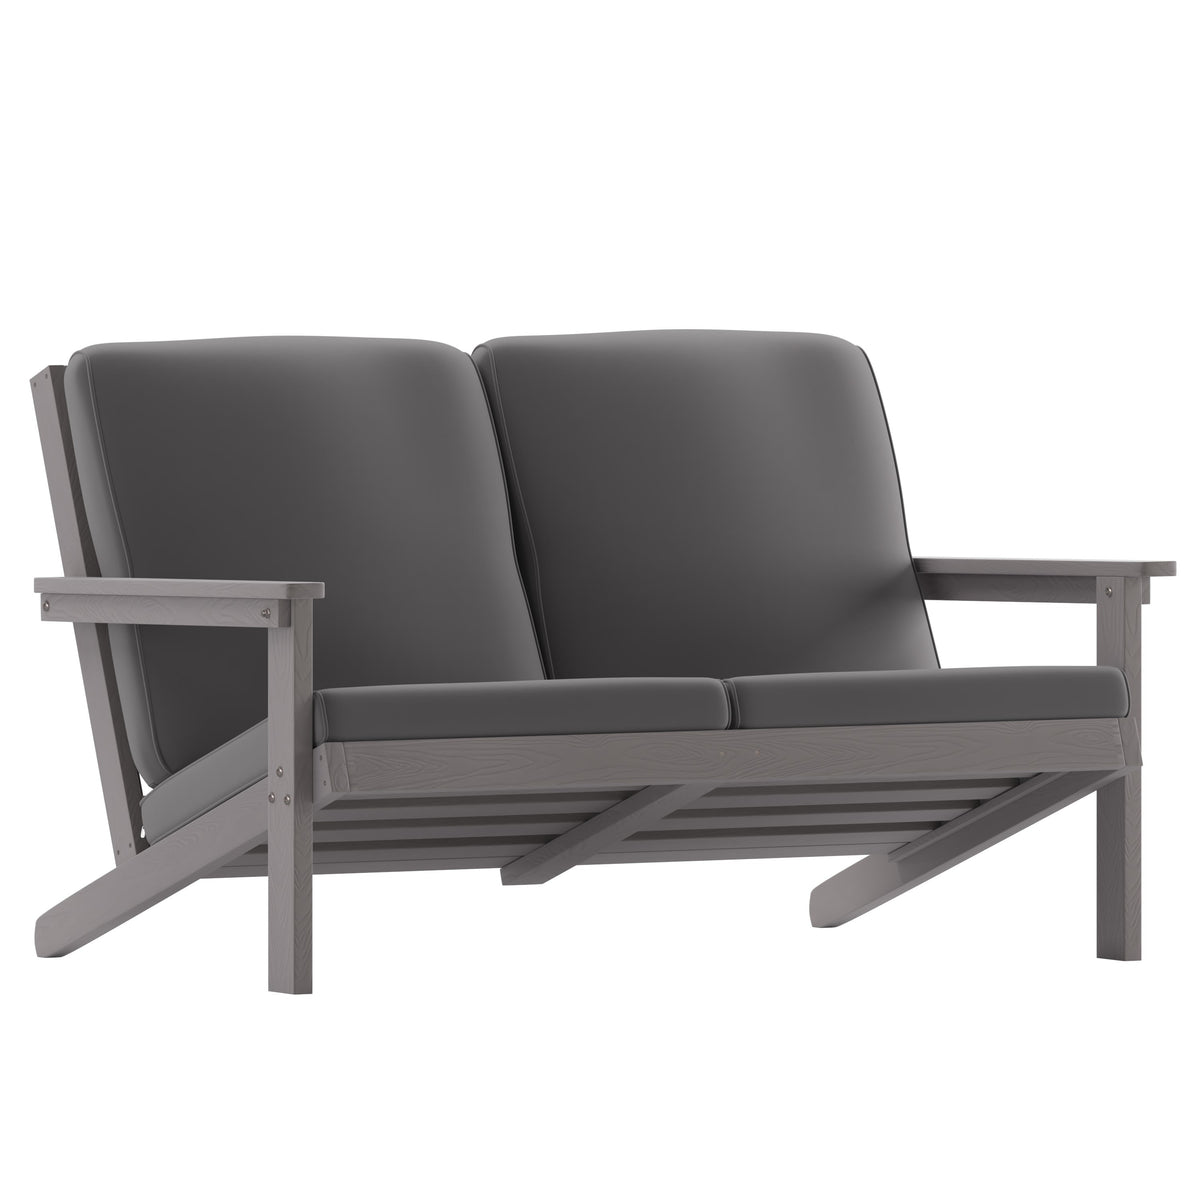 Gray |#| All-Weather Poly Resin Adirondack Loveseat & Cushions - Gray/Gray